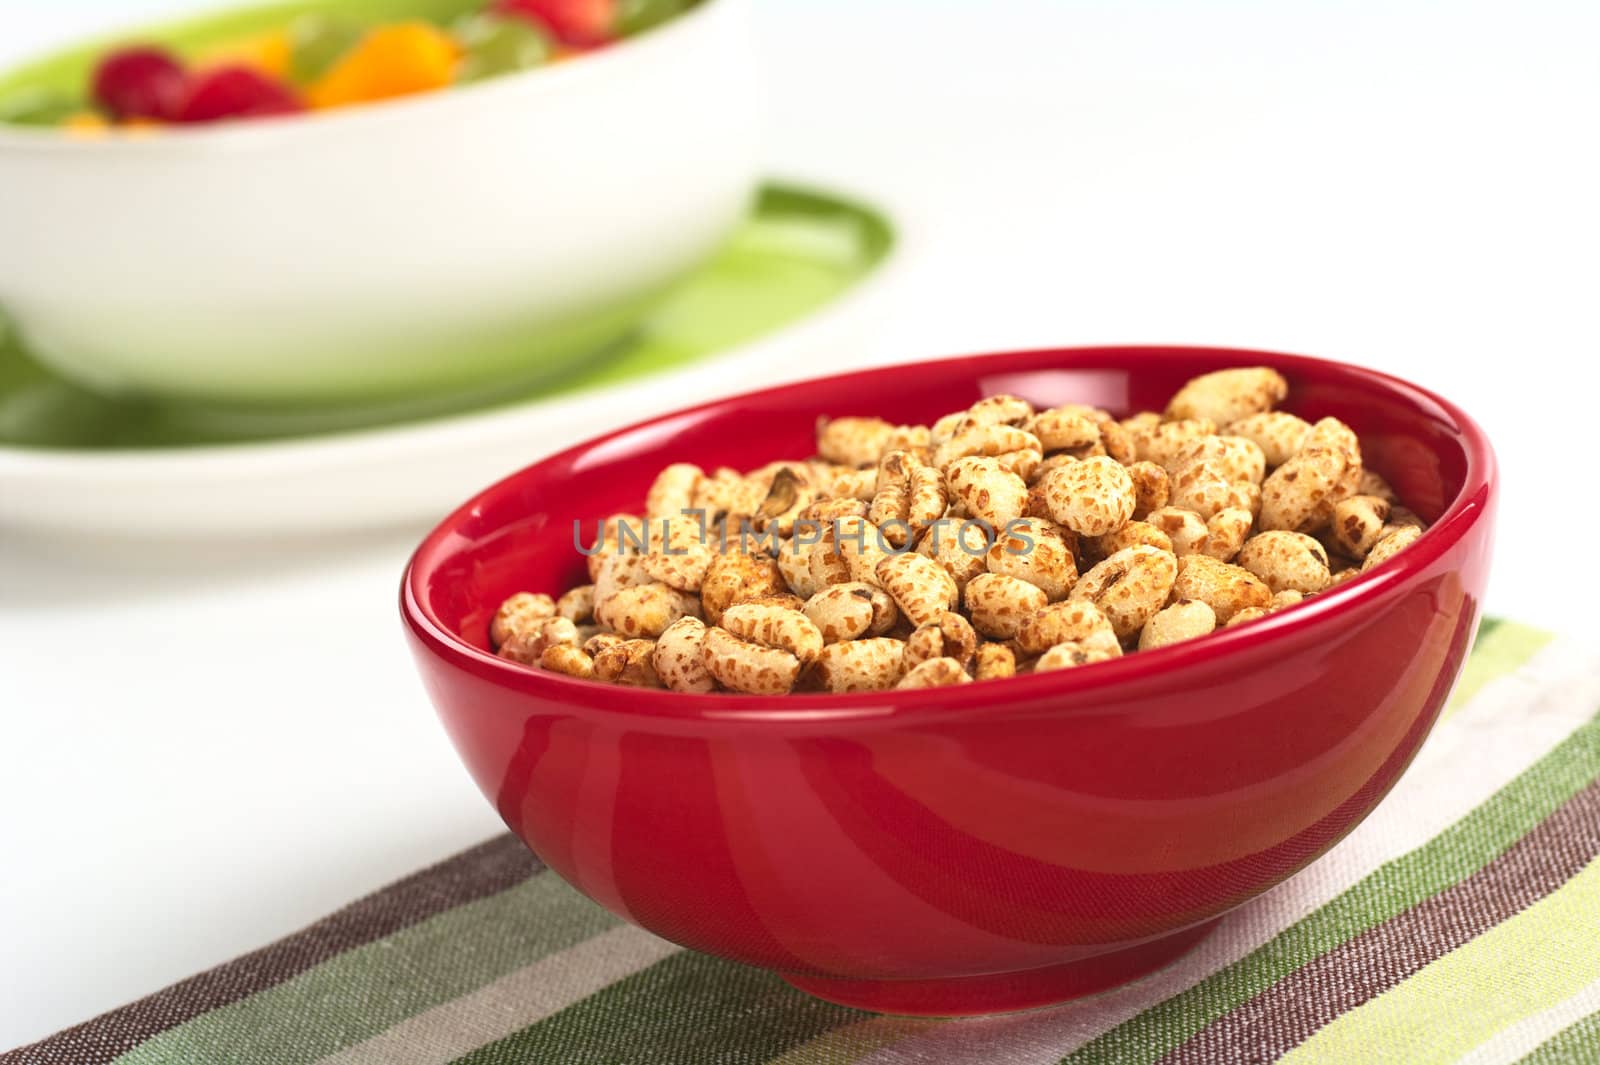 Puffed Wheat Cereal by ildi